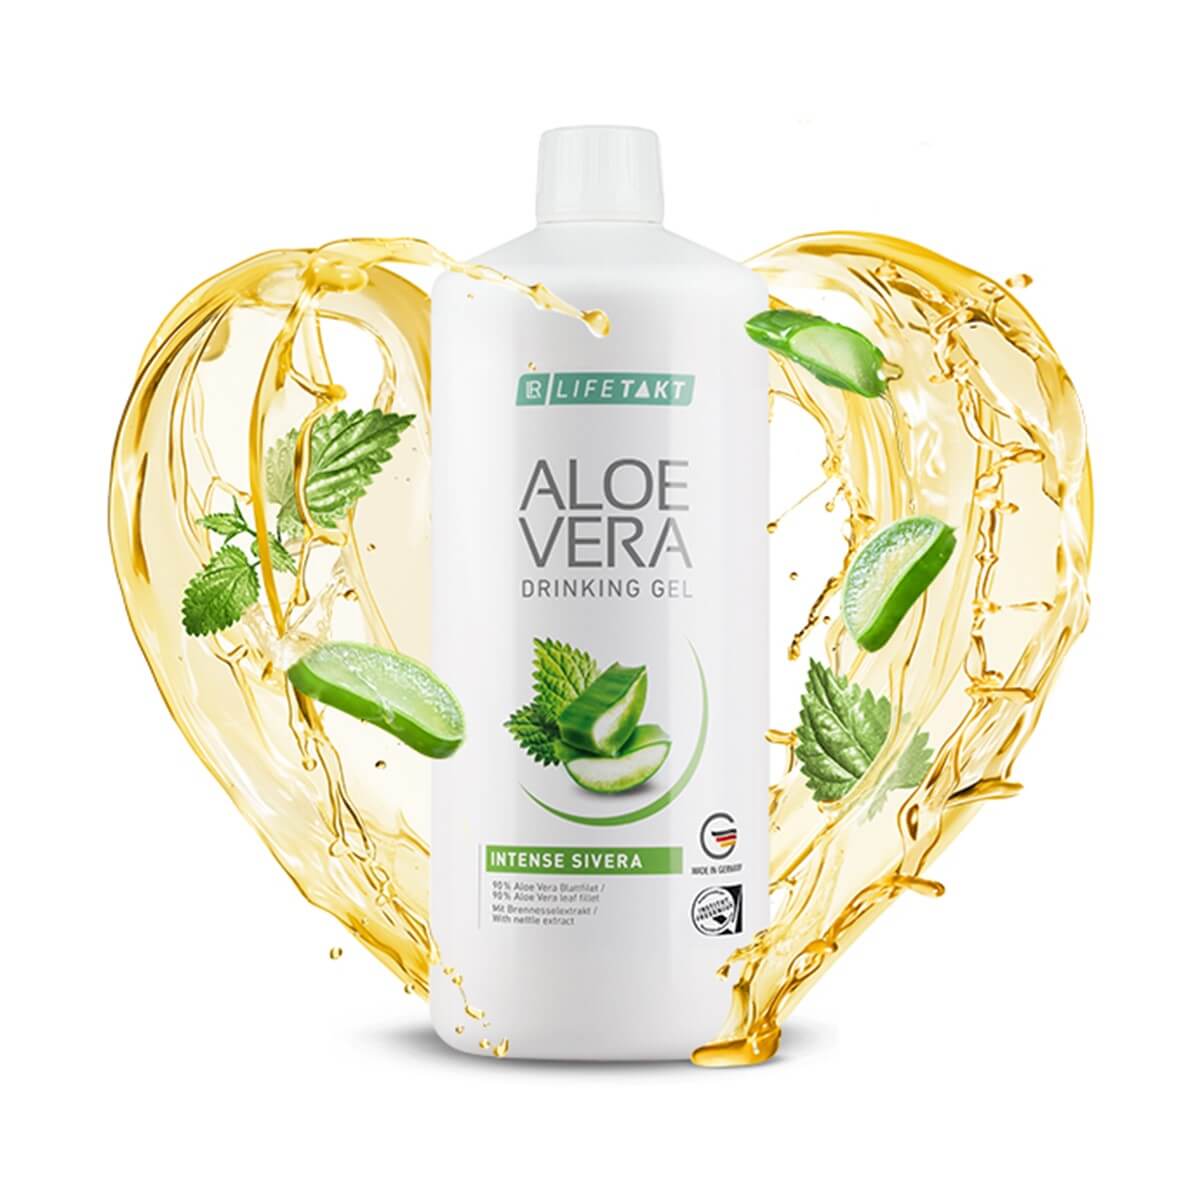 Aloe Vera Drinking Gel Intensive Sivera with natural extract of nettle